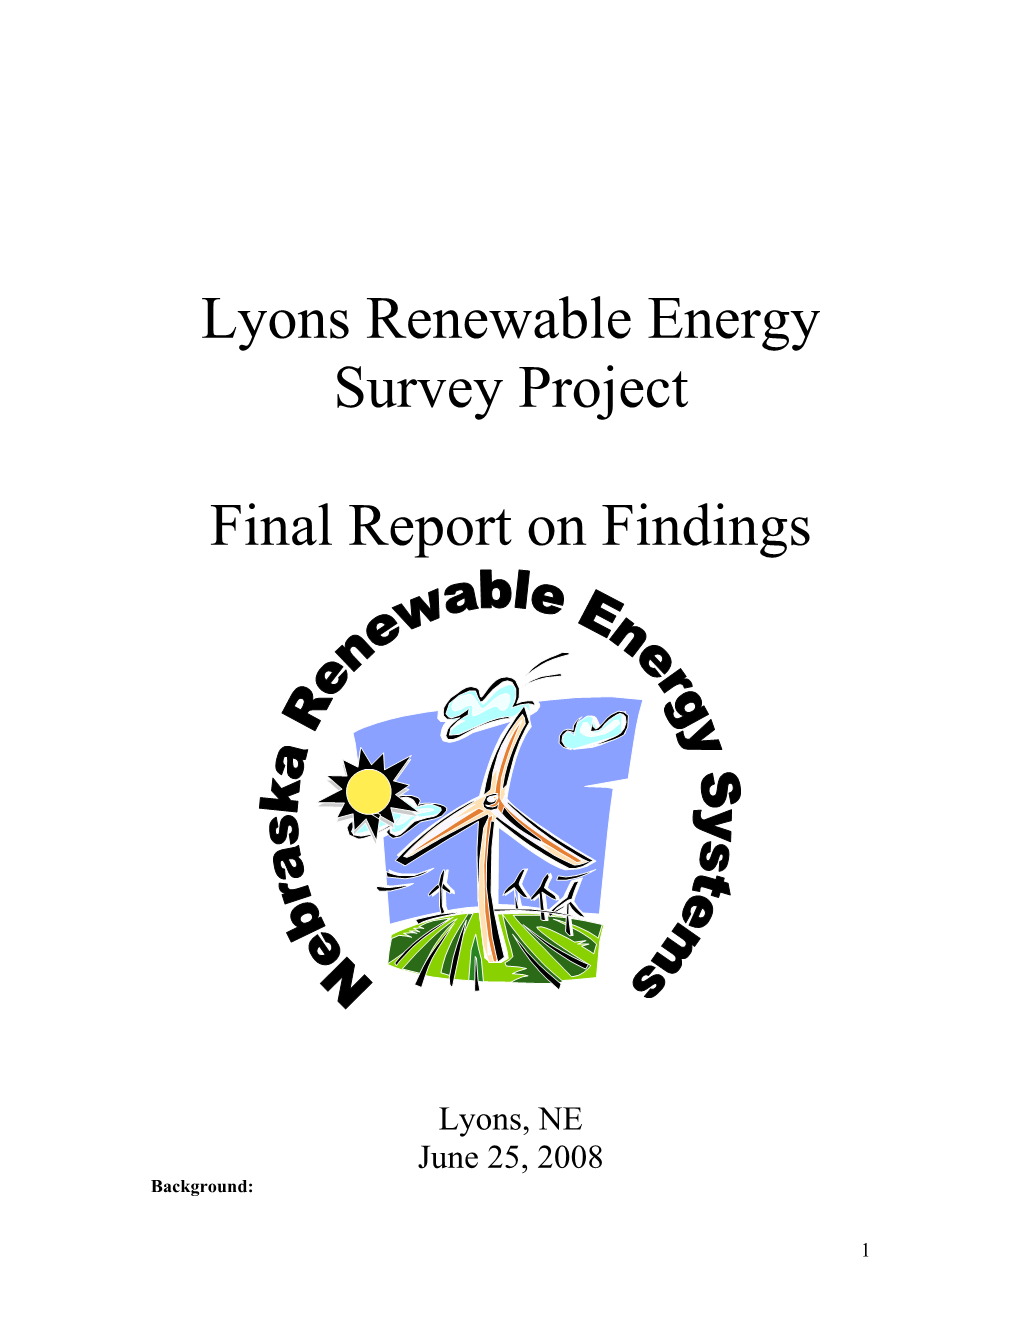 The Following Represent the Results of the Lyon Energy Survey Distributed by Nebraska Renewable